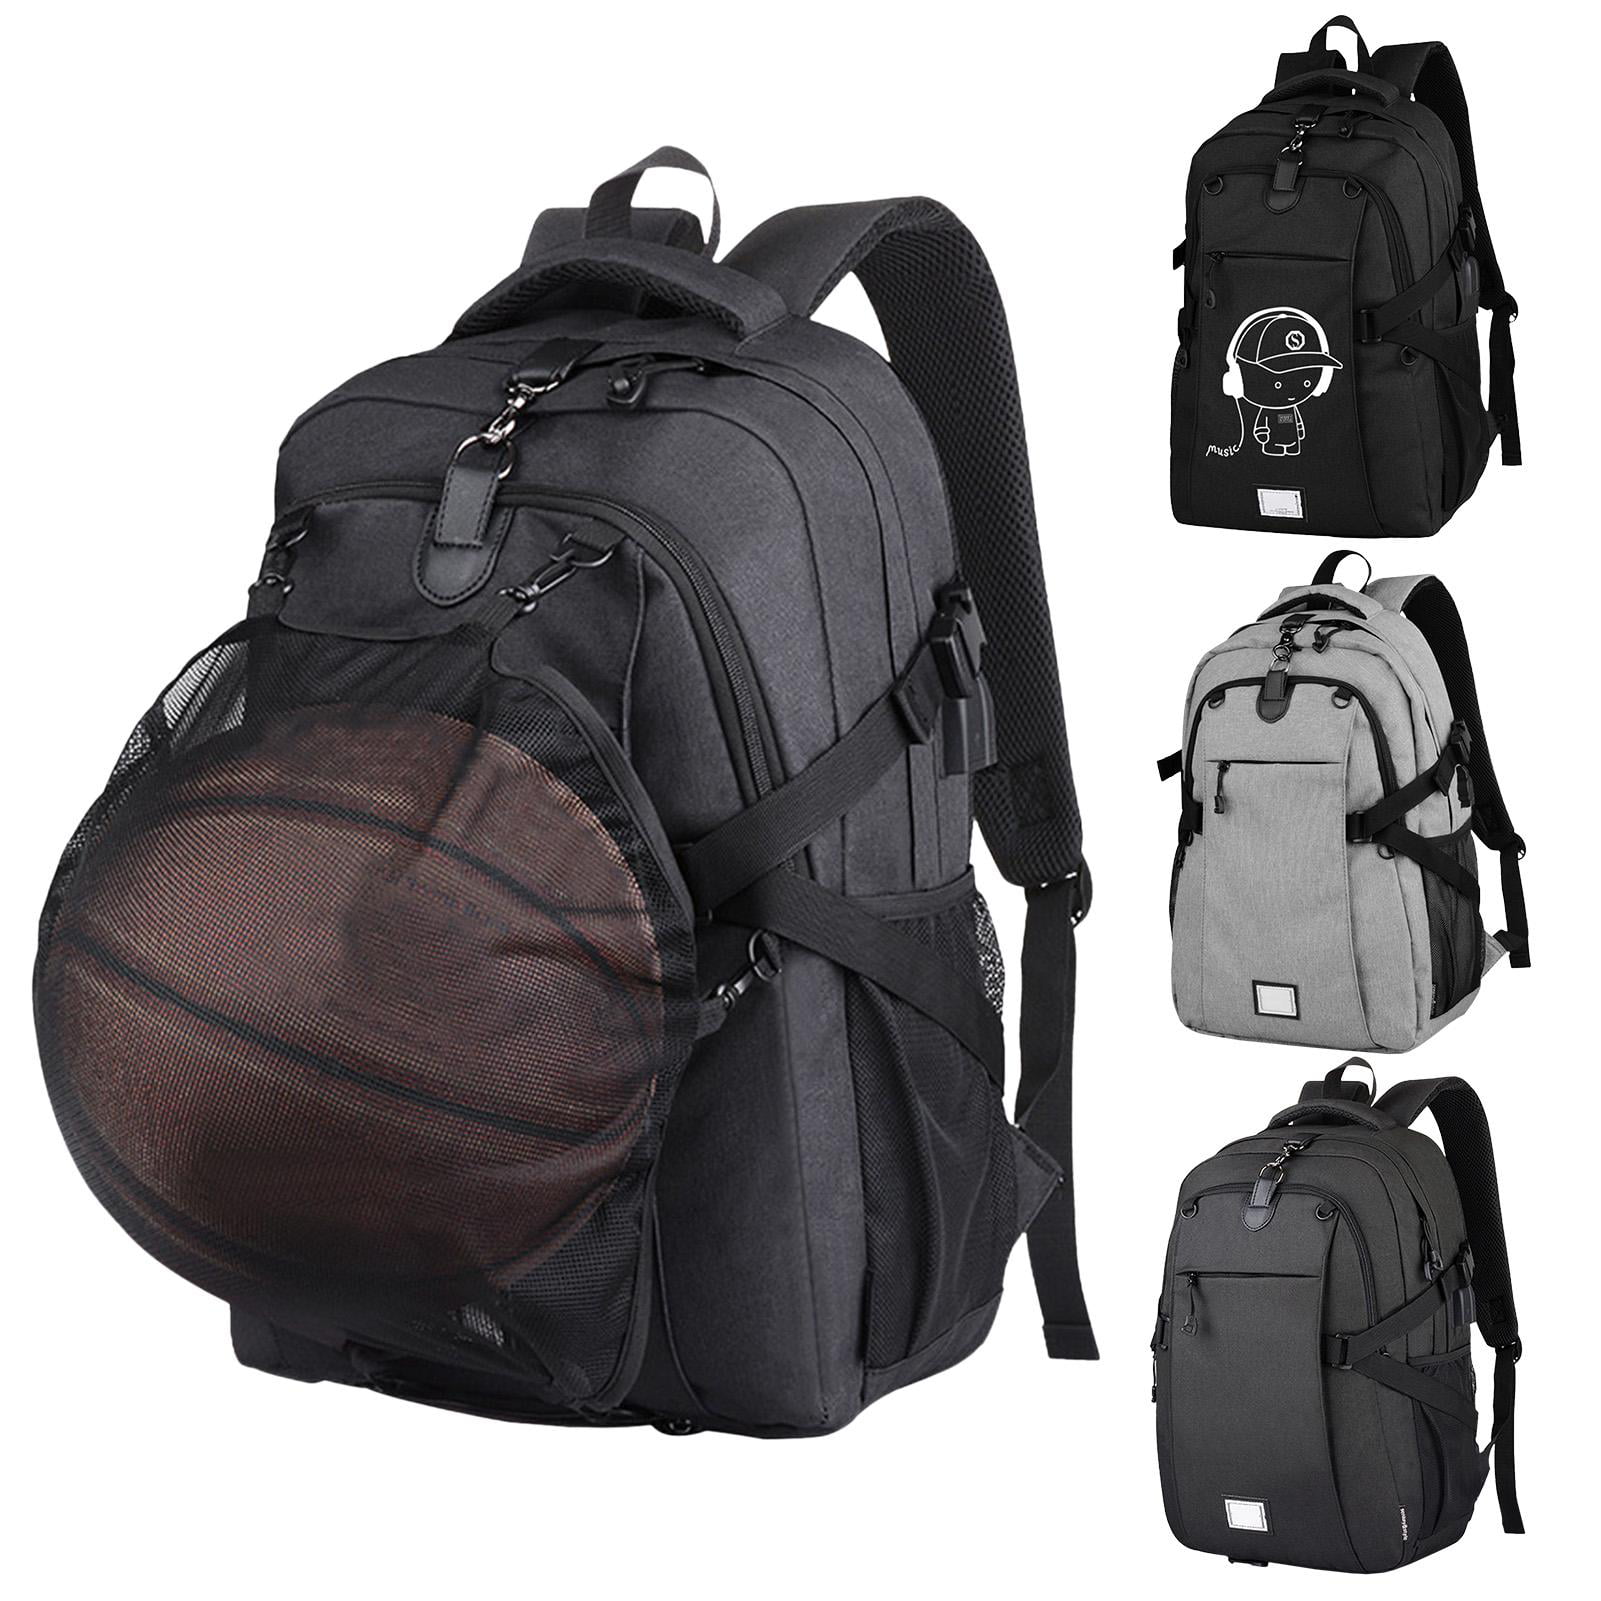 Basketball Backpack with USB Charging Port Durable Mens Backpack for Outdoor with Ball Compartment Fits 15.6 Inch Laptop